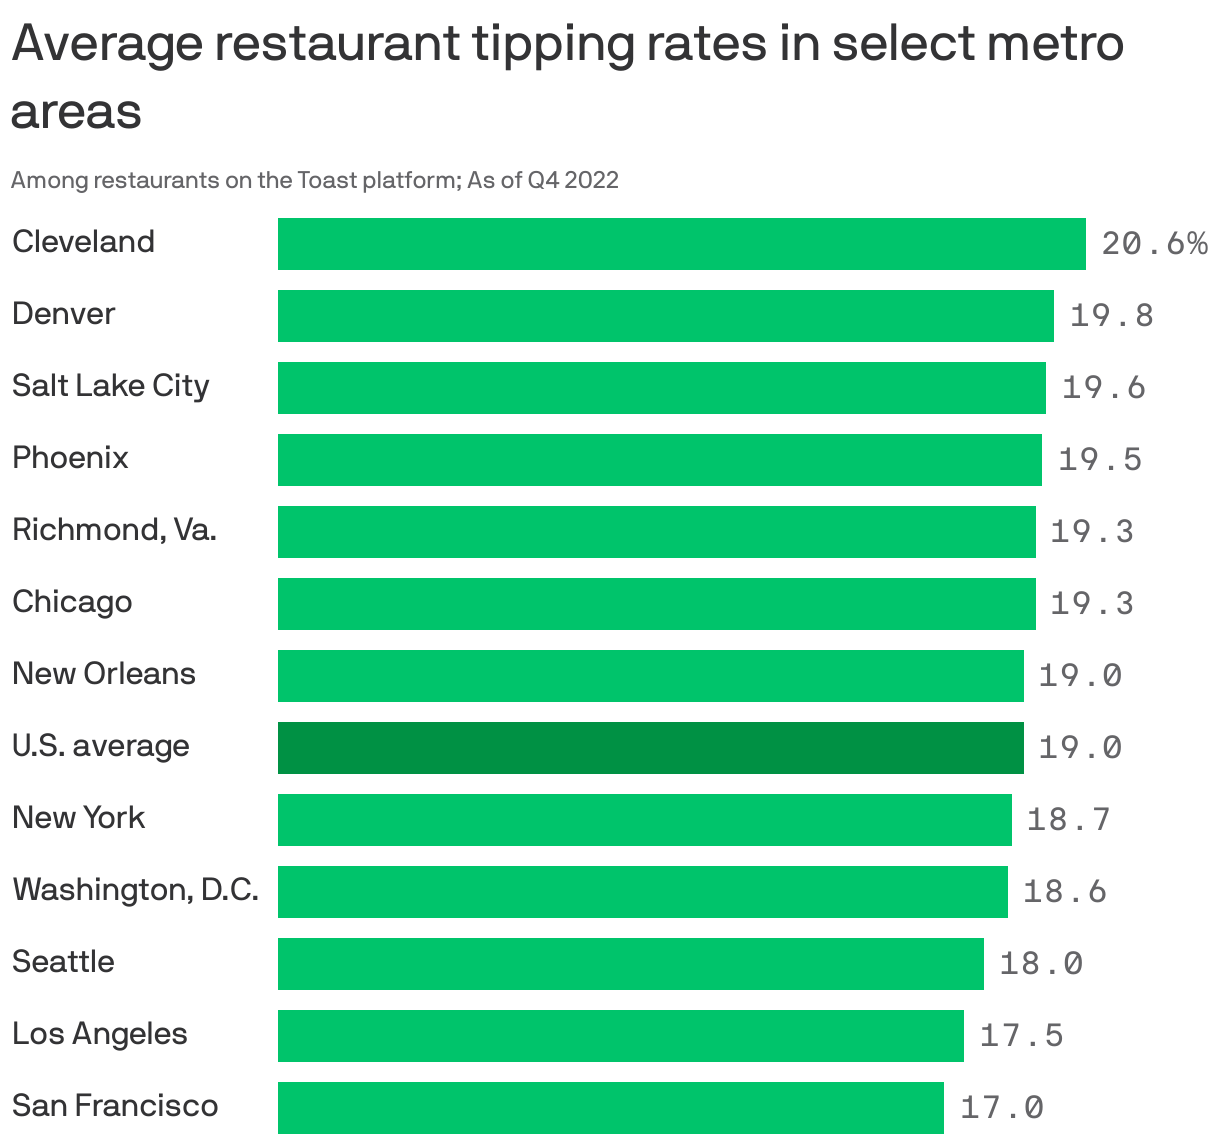 Average restaurant tipping rates in select metro areas